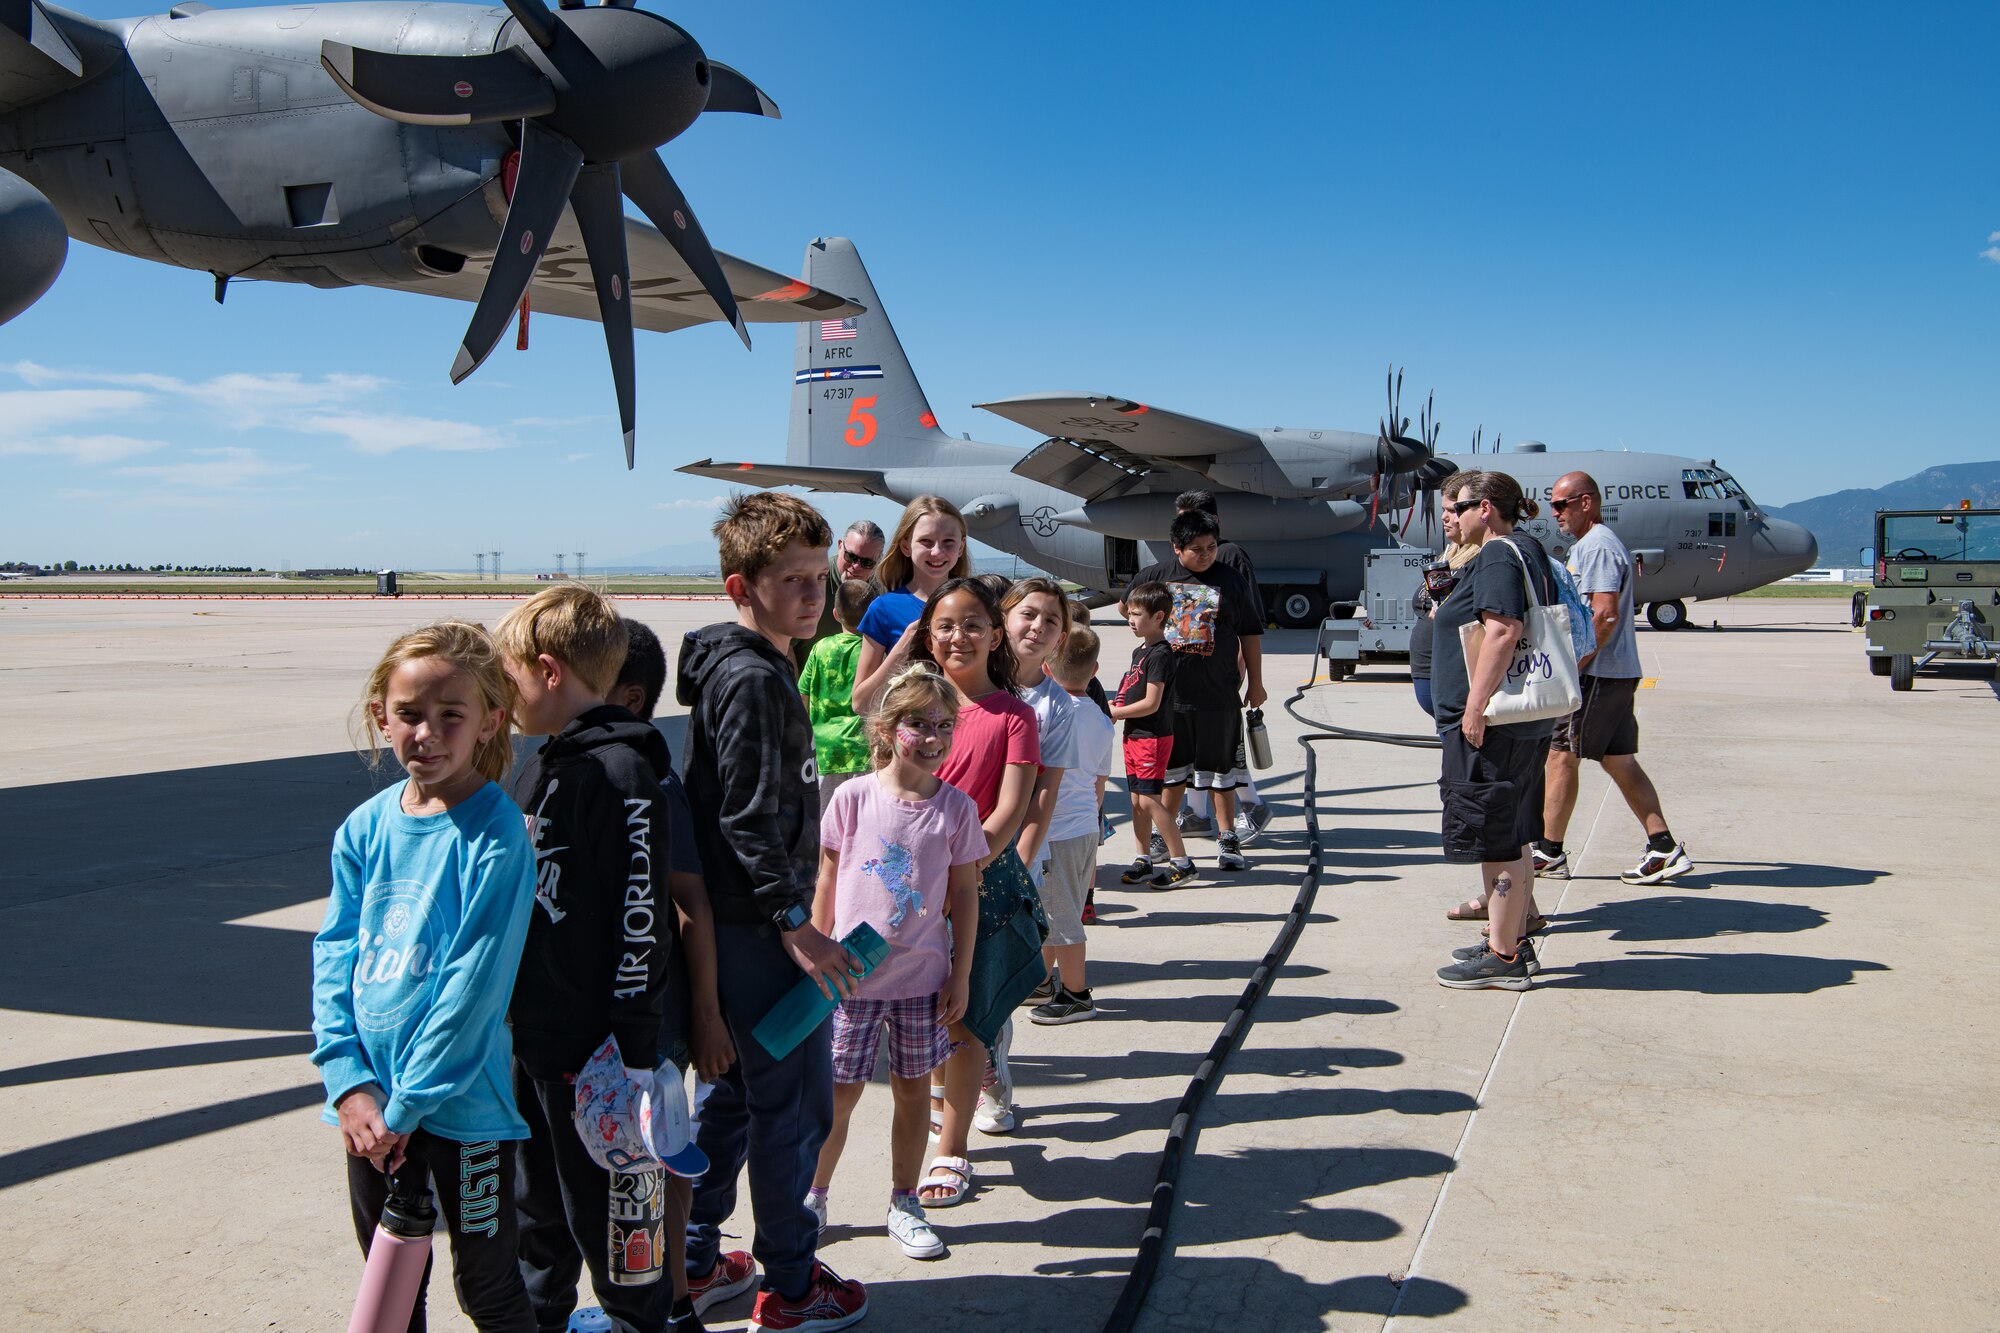 A group of children accompanied by chaperones line up in front of a C-130 with another C-130 in the background.